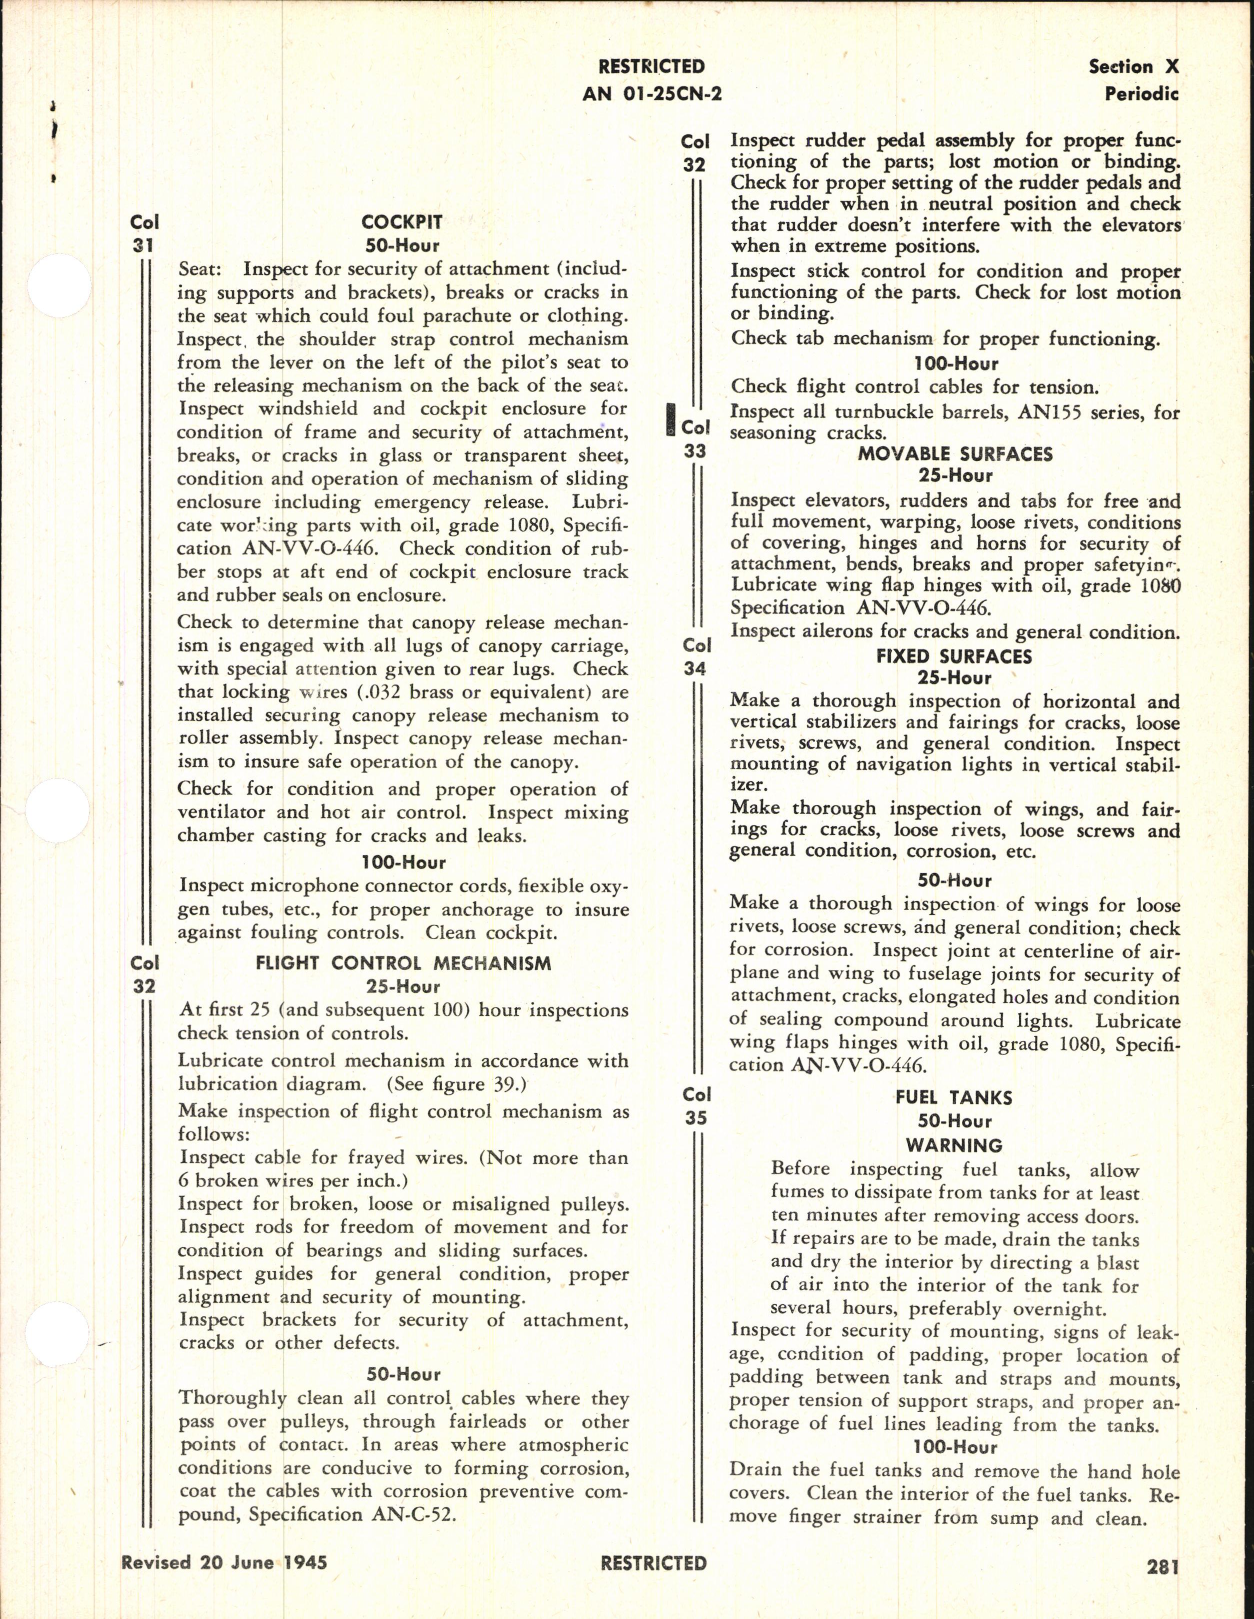 Sample page 5 from AirCorps Library document: Erection & Maintenance Instructions for P-40N Series, Kittyhawk IV